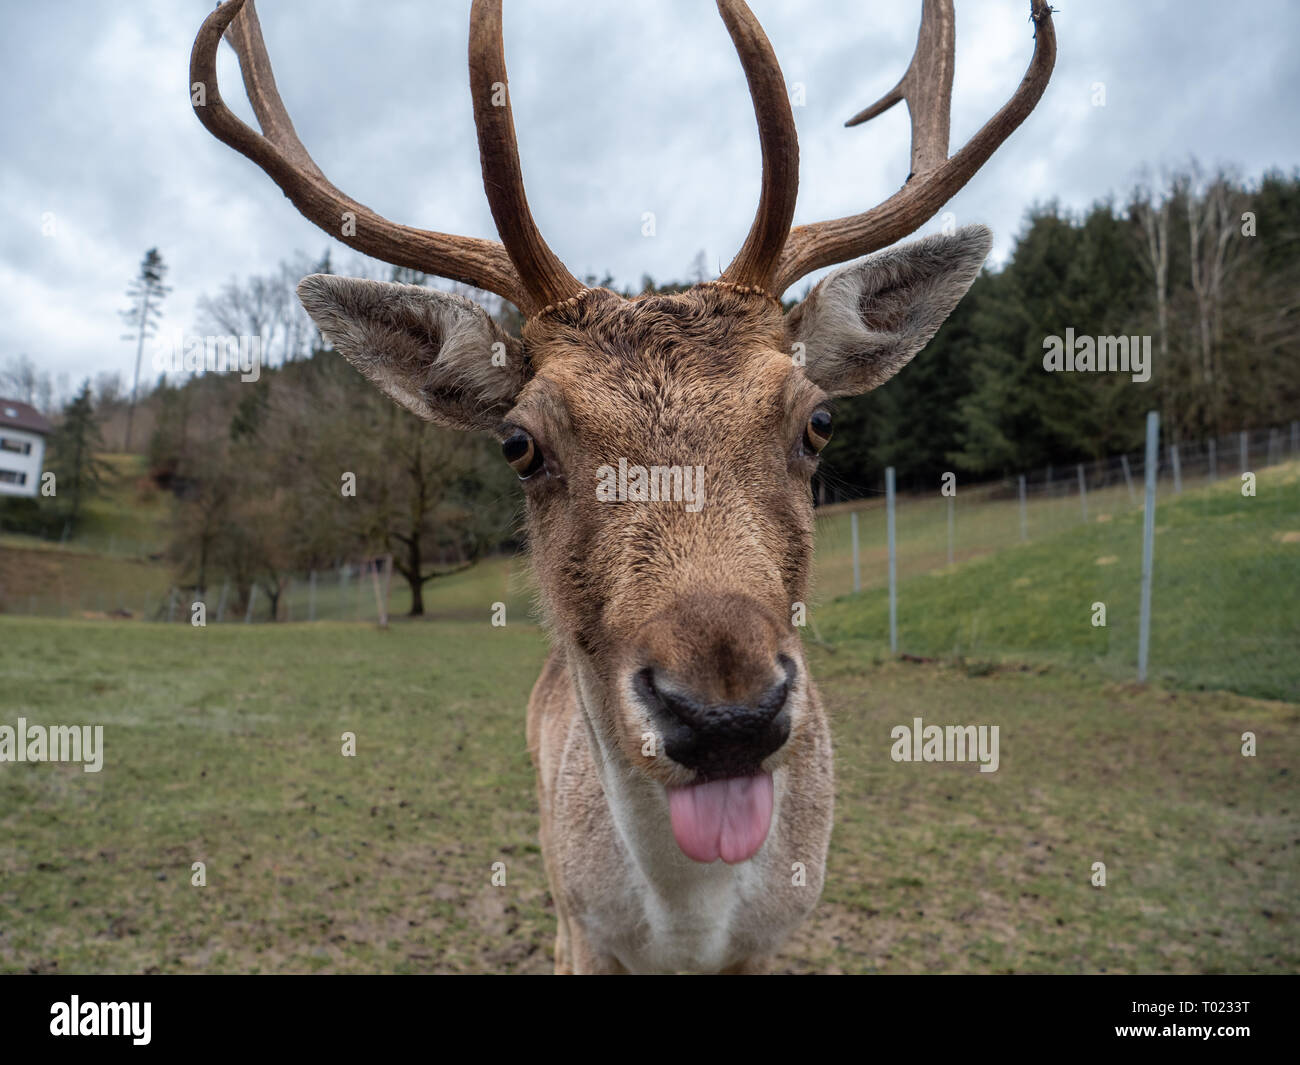 A Fallow Deer Buck with Antlers in the Enclusure of a Breed Stock Photo